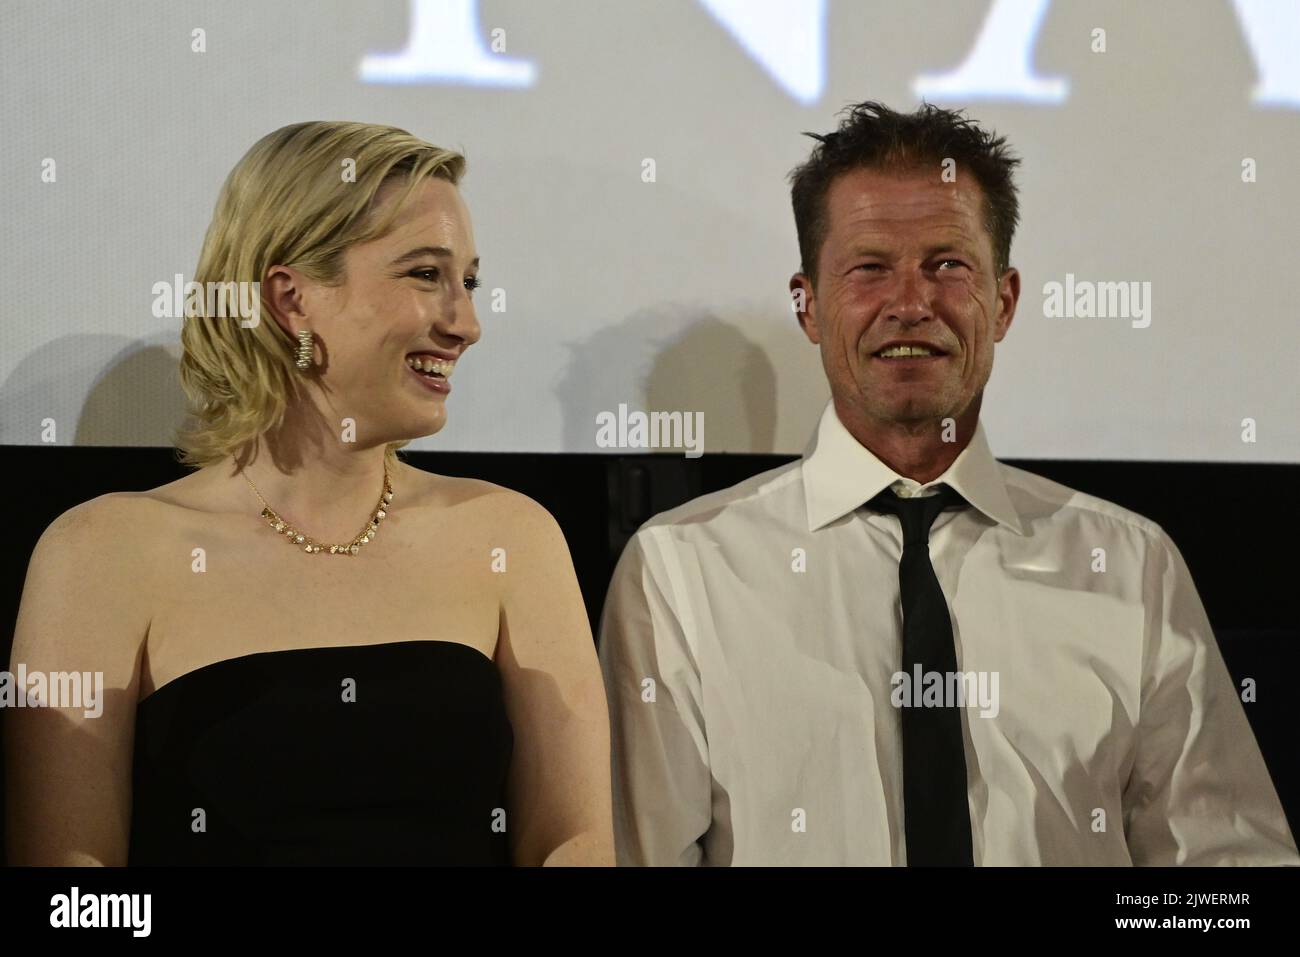 Prague, Czech Republic. 05th Sep, 2022. Actors L-R Sophie Lowe and Til Schweiger attend the premiere of the film Medieval (Jan Zizka), one of the most expensive films in Czech history directed by Petr Jakl, on September 5, 2022, in Prague, Czech Republic. Credit: Roman Vondrous/CTK Photo/Alamy Live News Stock Photo